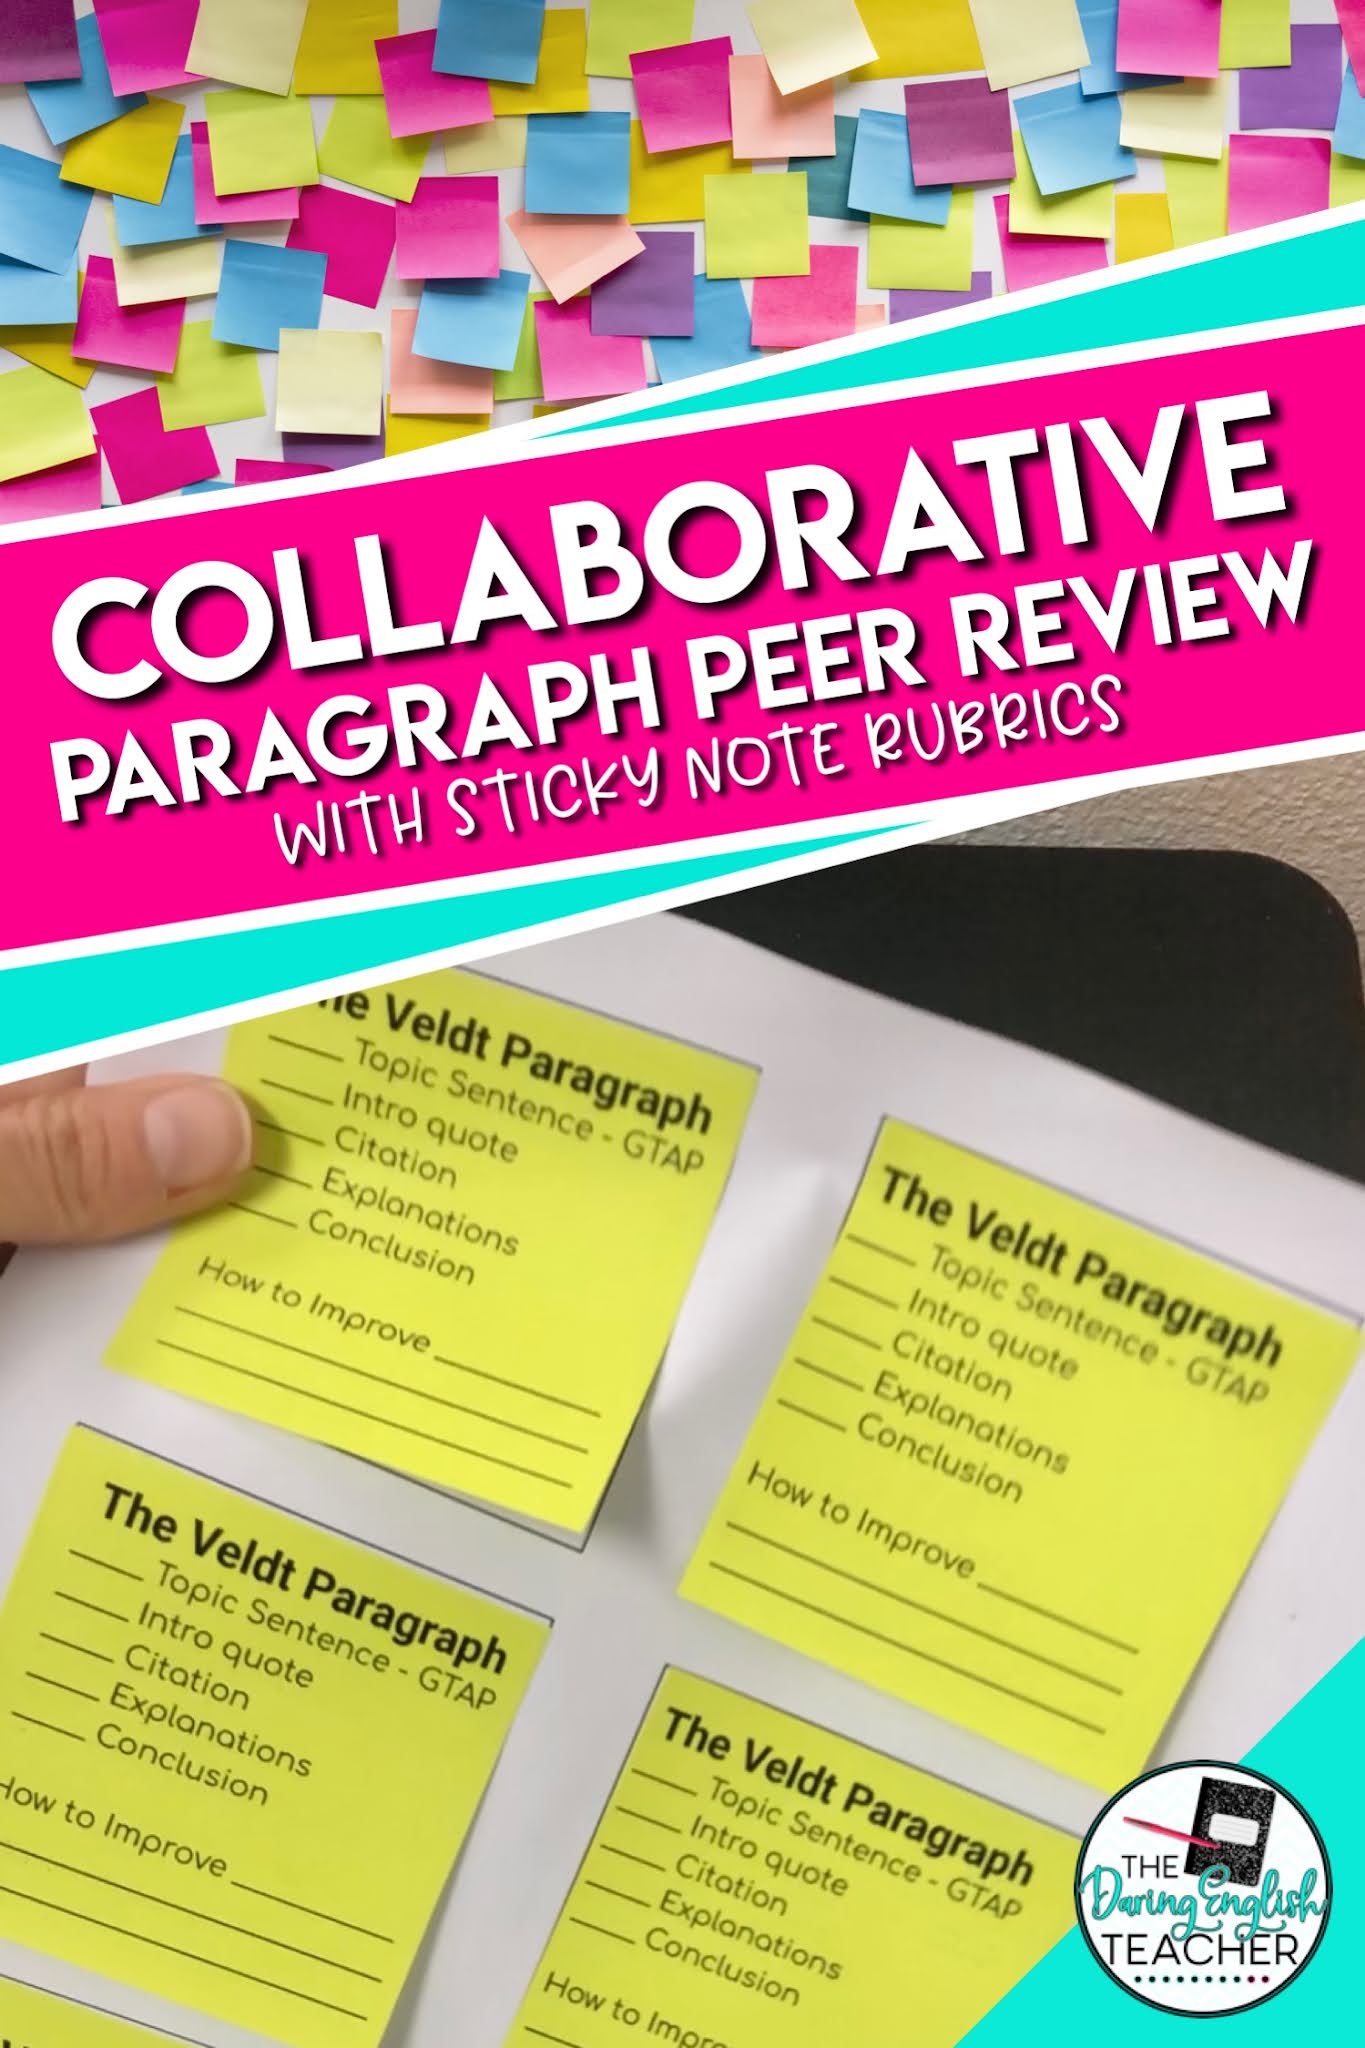 Collaborative Paragraph Peer Review with Sticky Note Rubrics